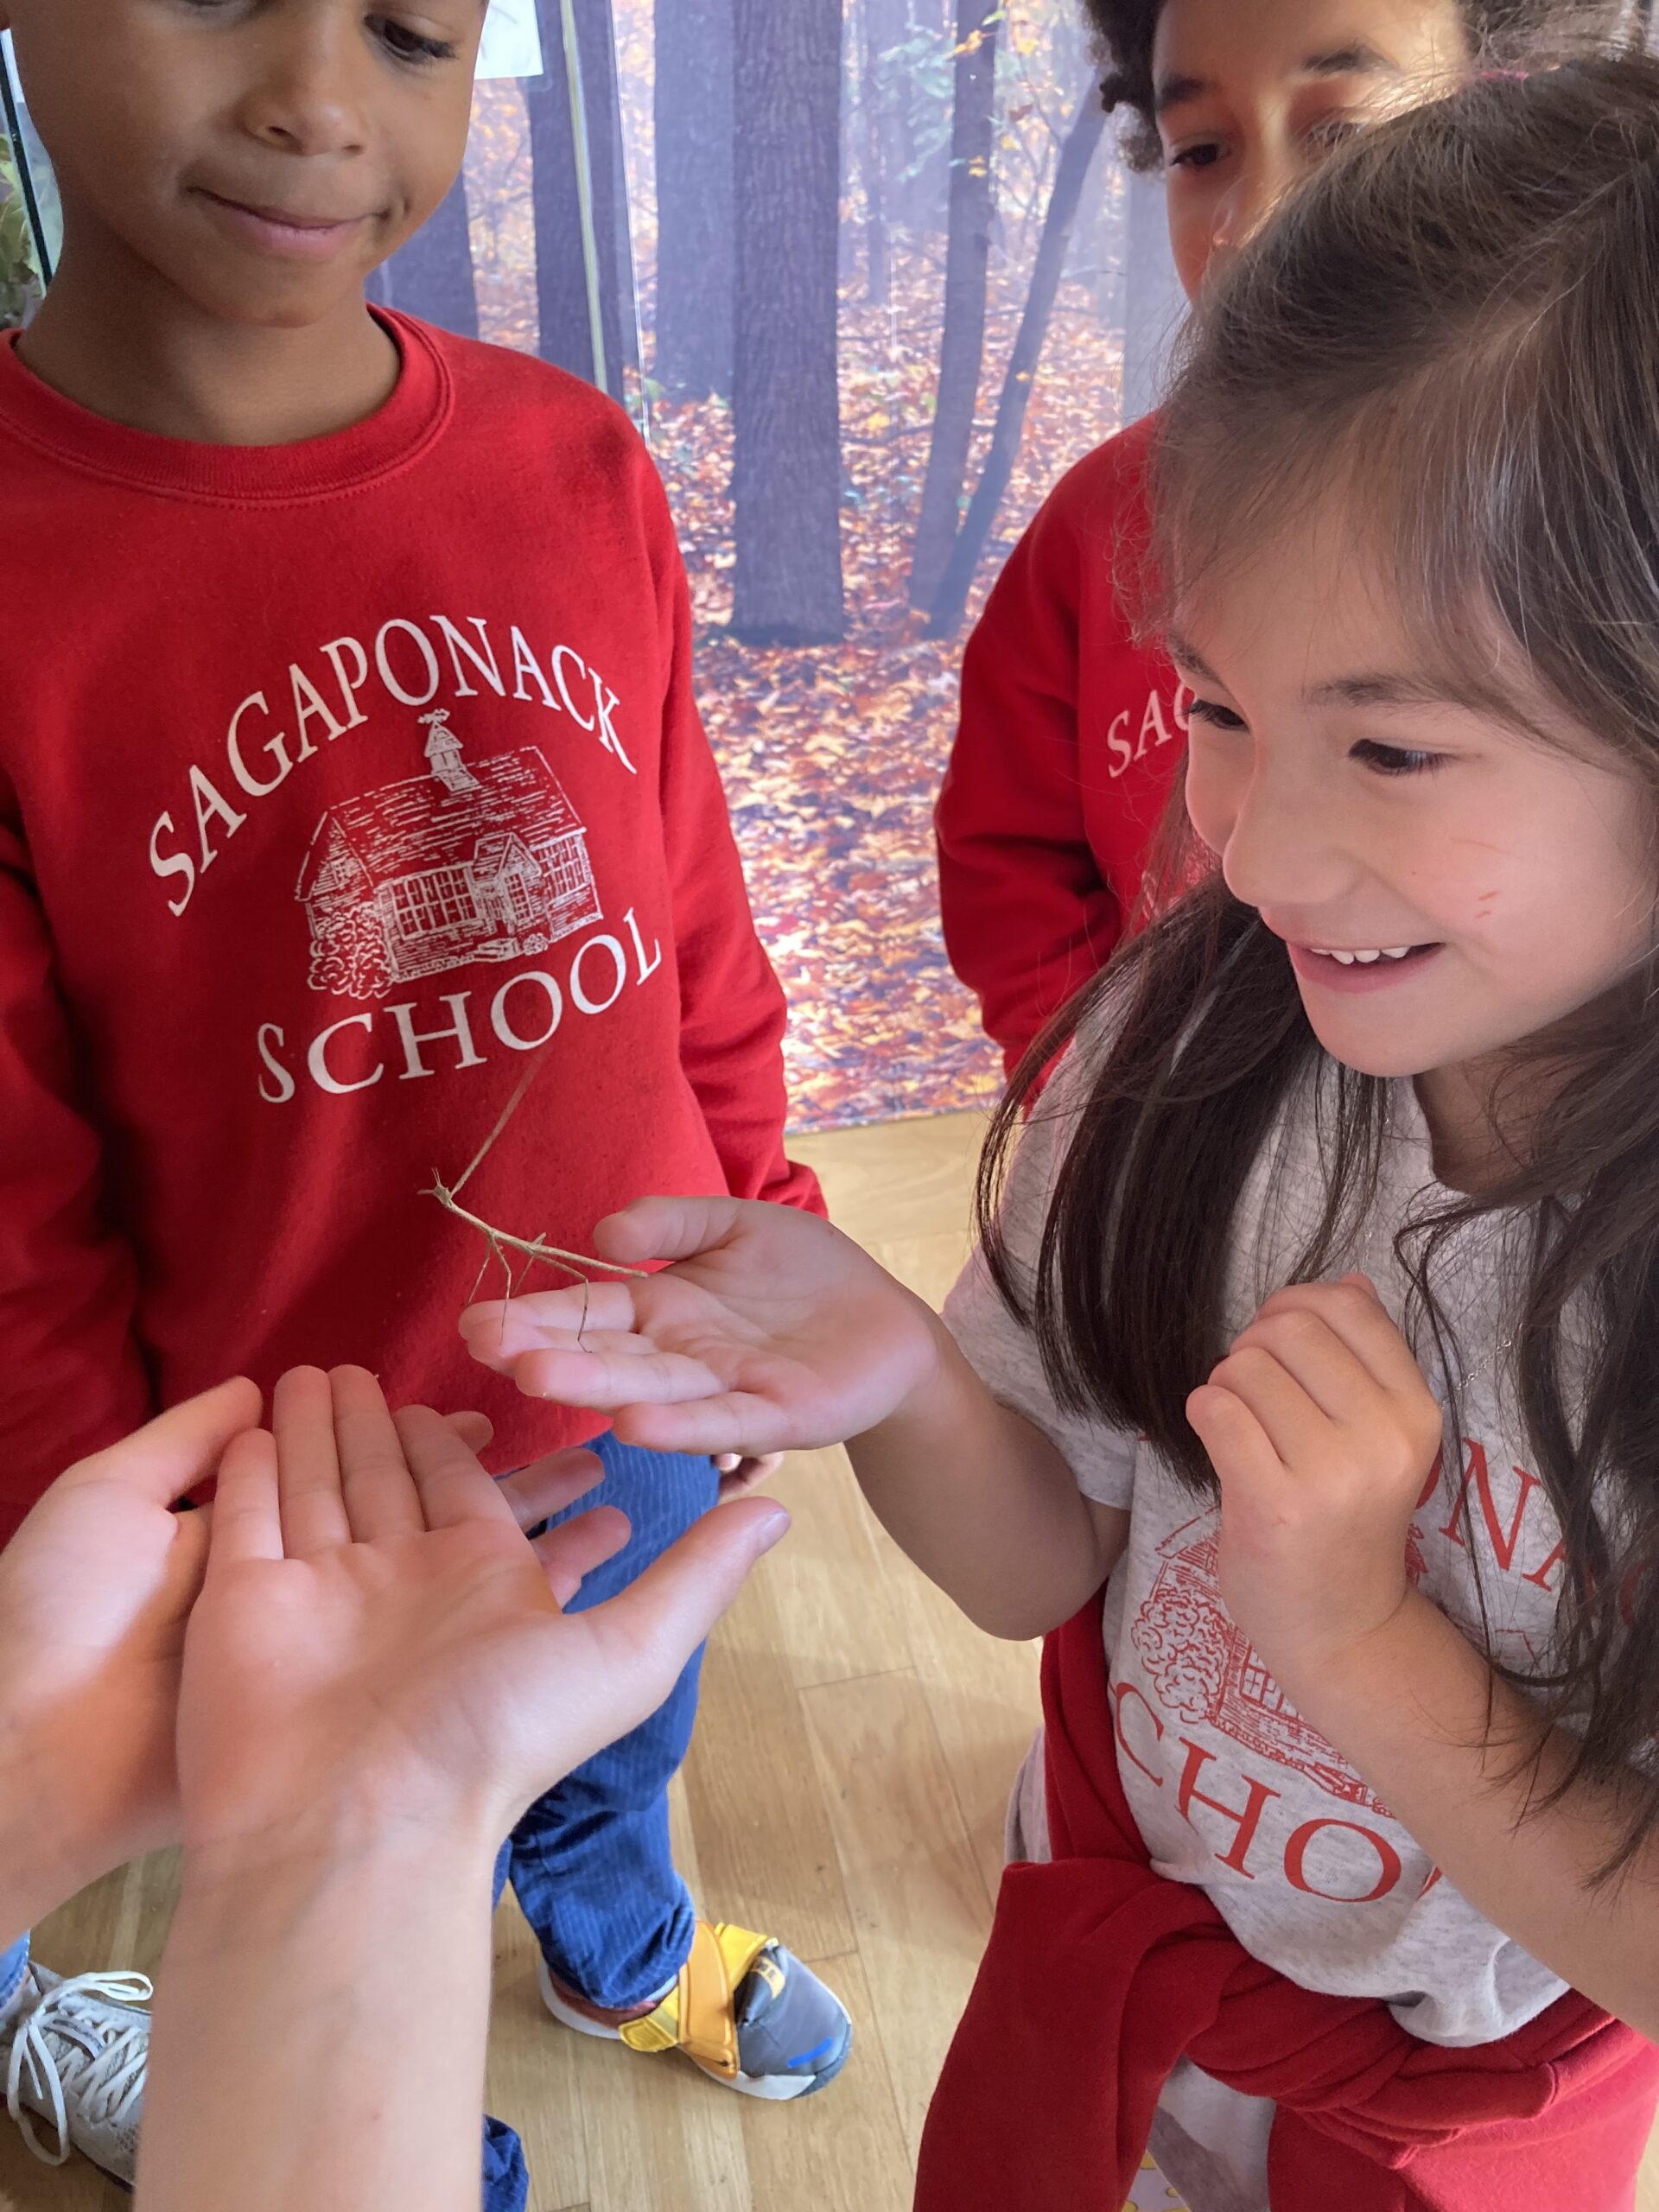 Sagaponack School students had a hands-on experience with a stick bug during their educational lesson at SOFO. COURTESY SAGAPONACK SCHOOL